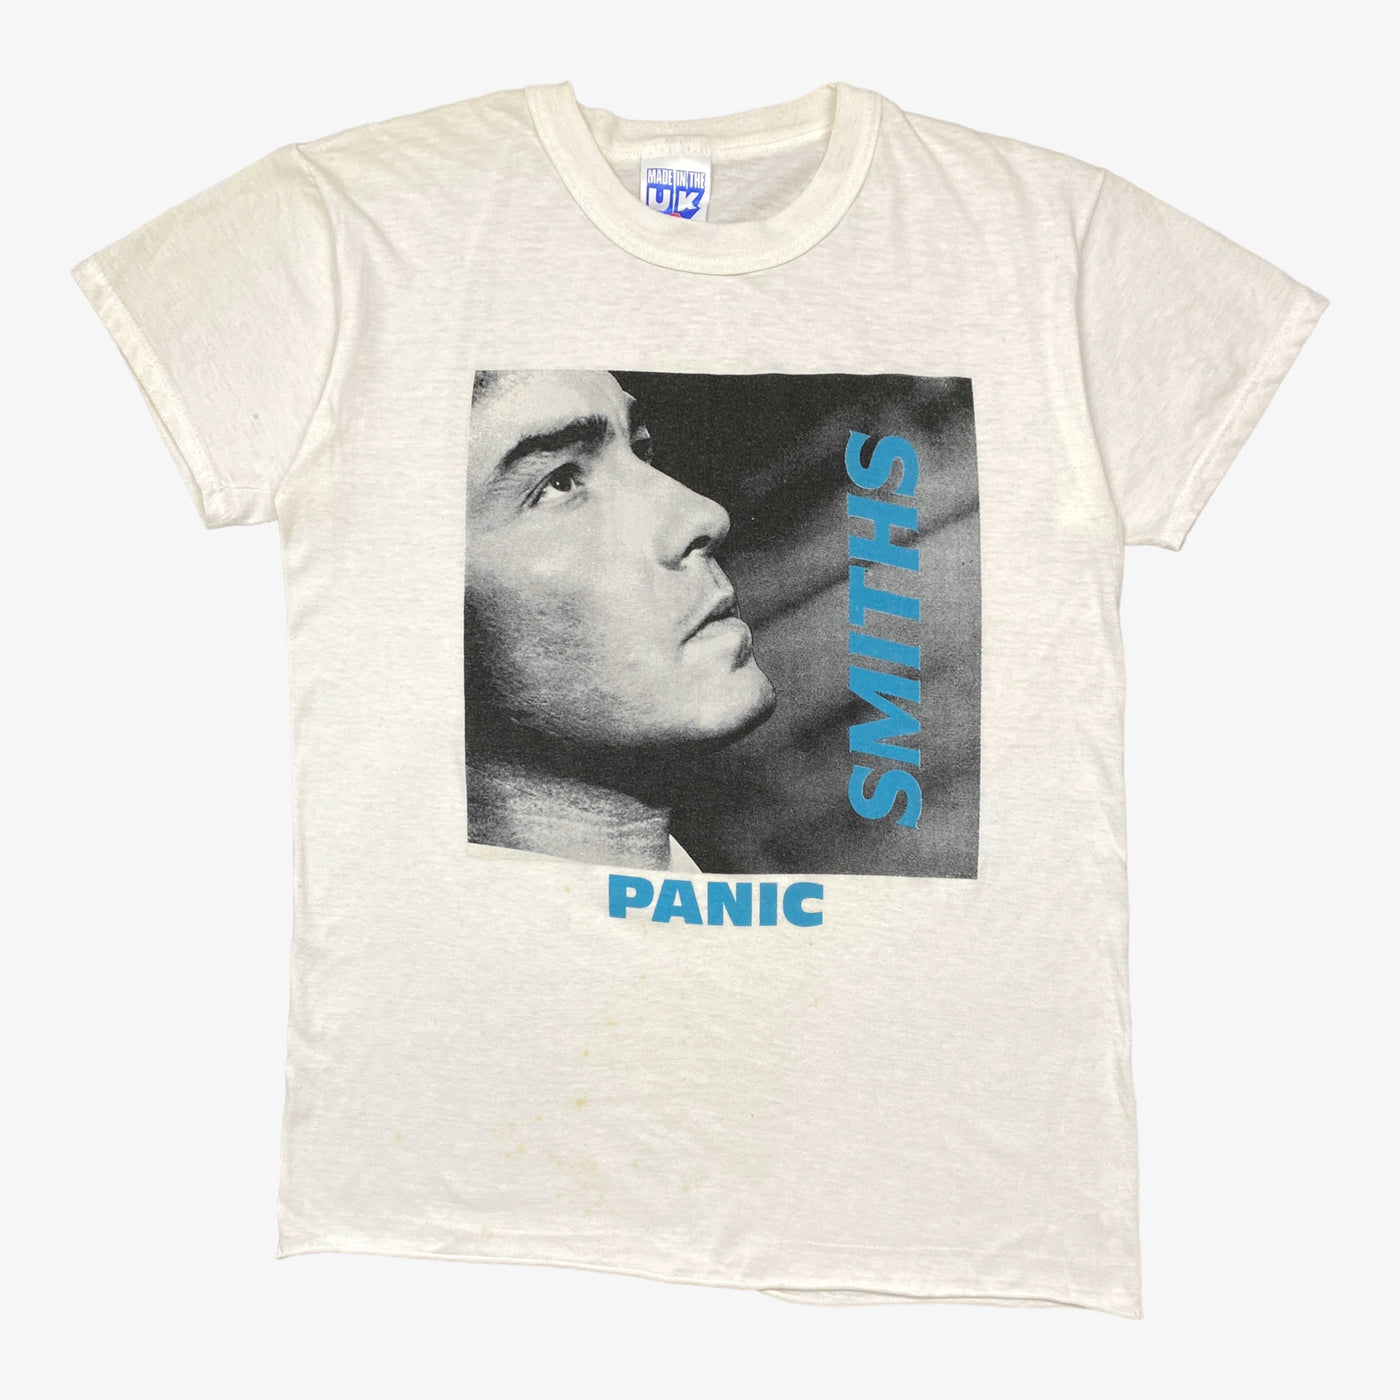 1987 THE SMITHS T-SHIRT